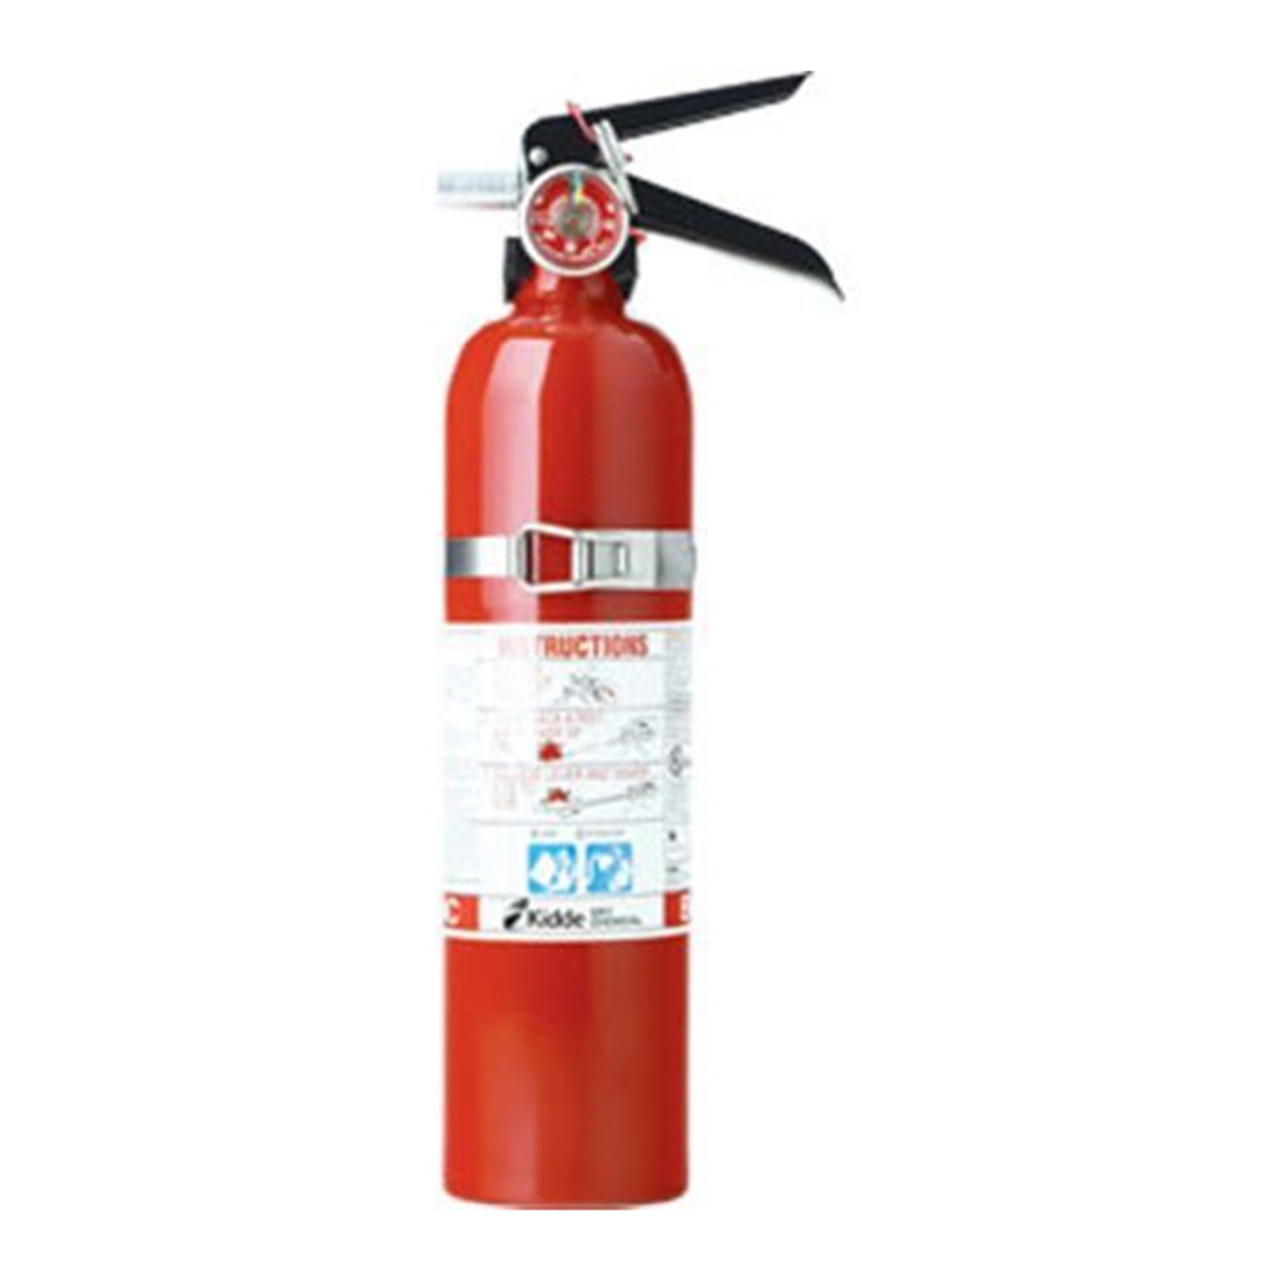 Fire Extinguisher Ul Rating Chart